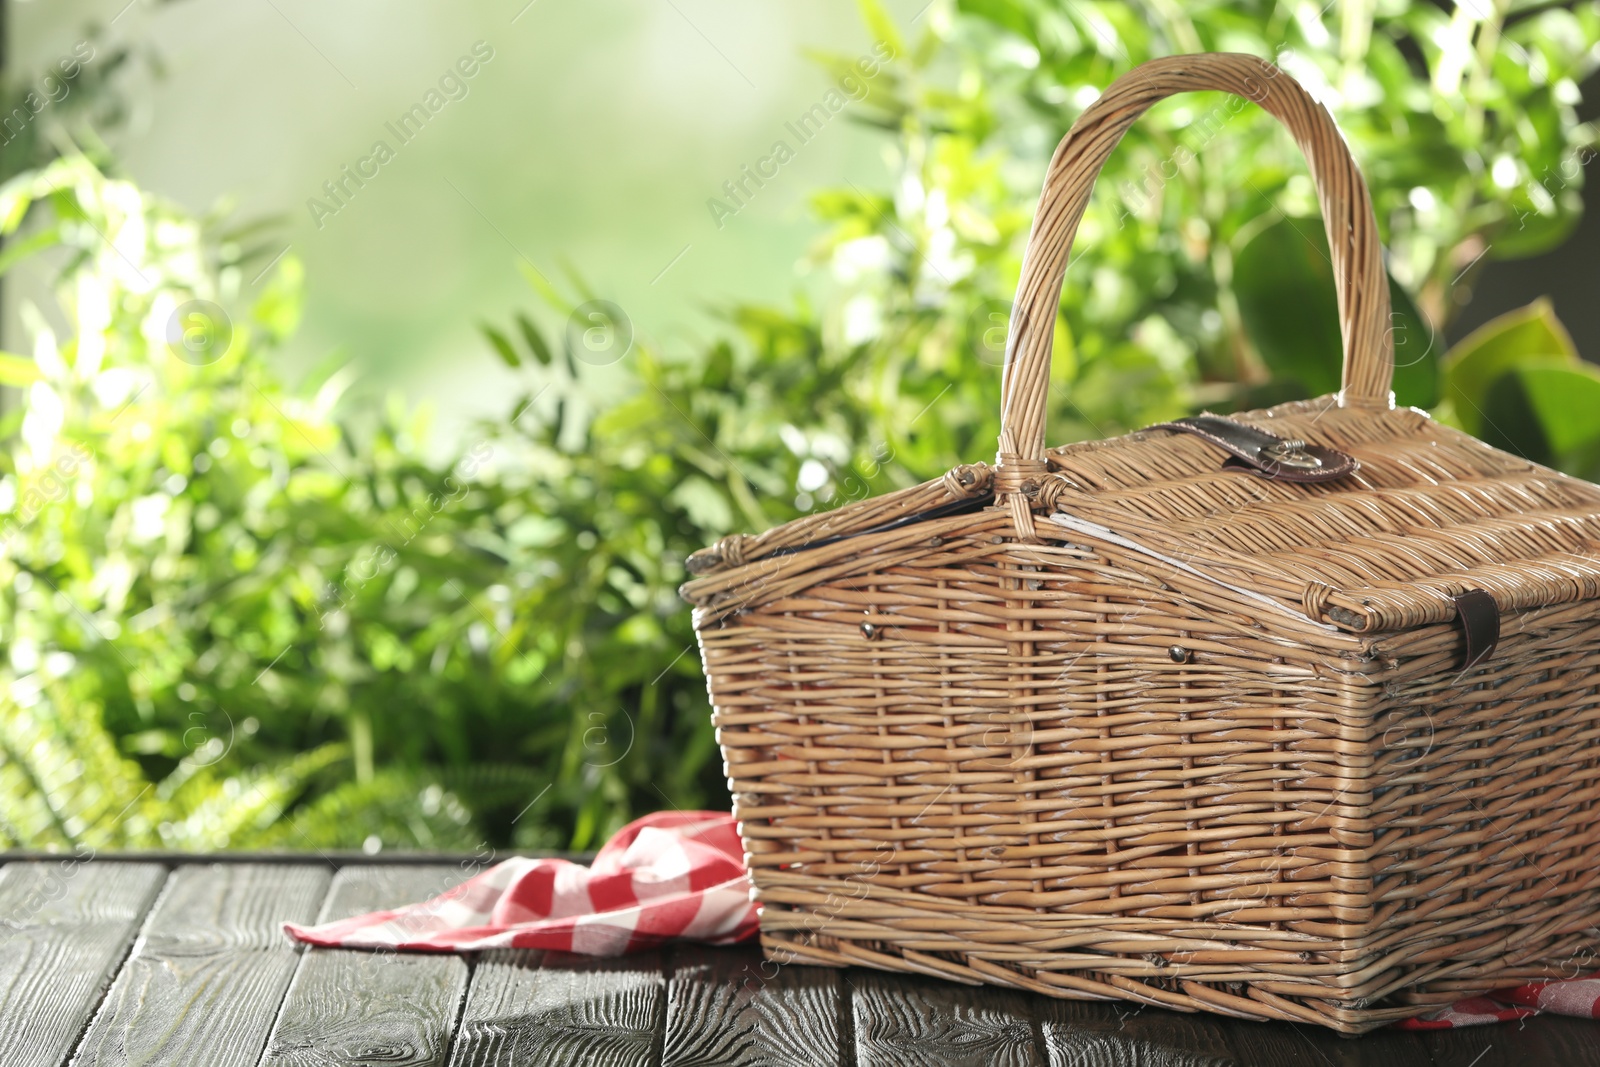 Photo of Closed wicker picnic basket on wooden table against blurred background, space for text